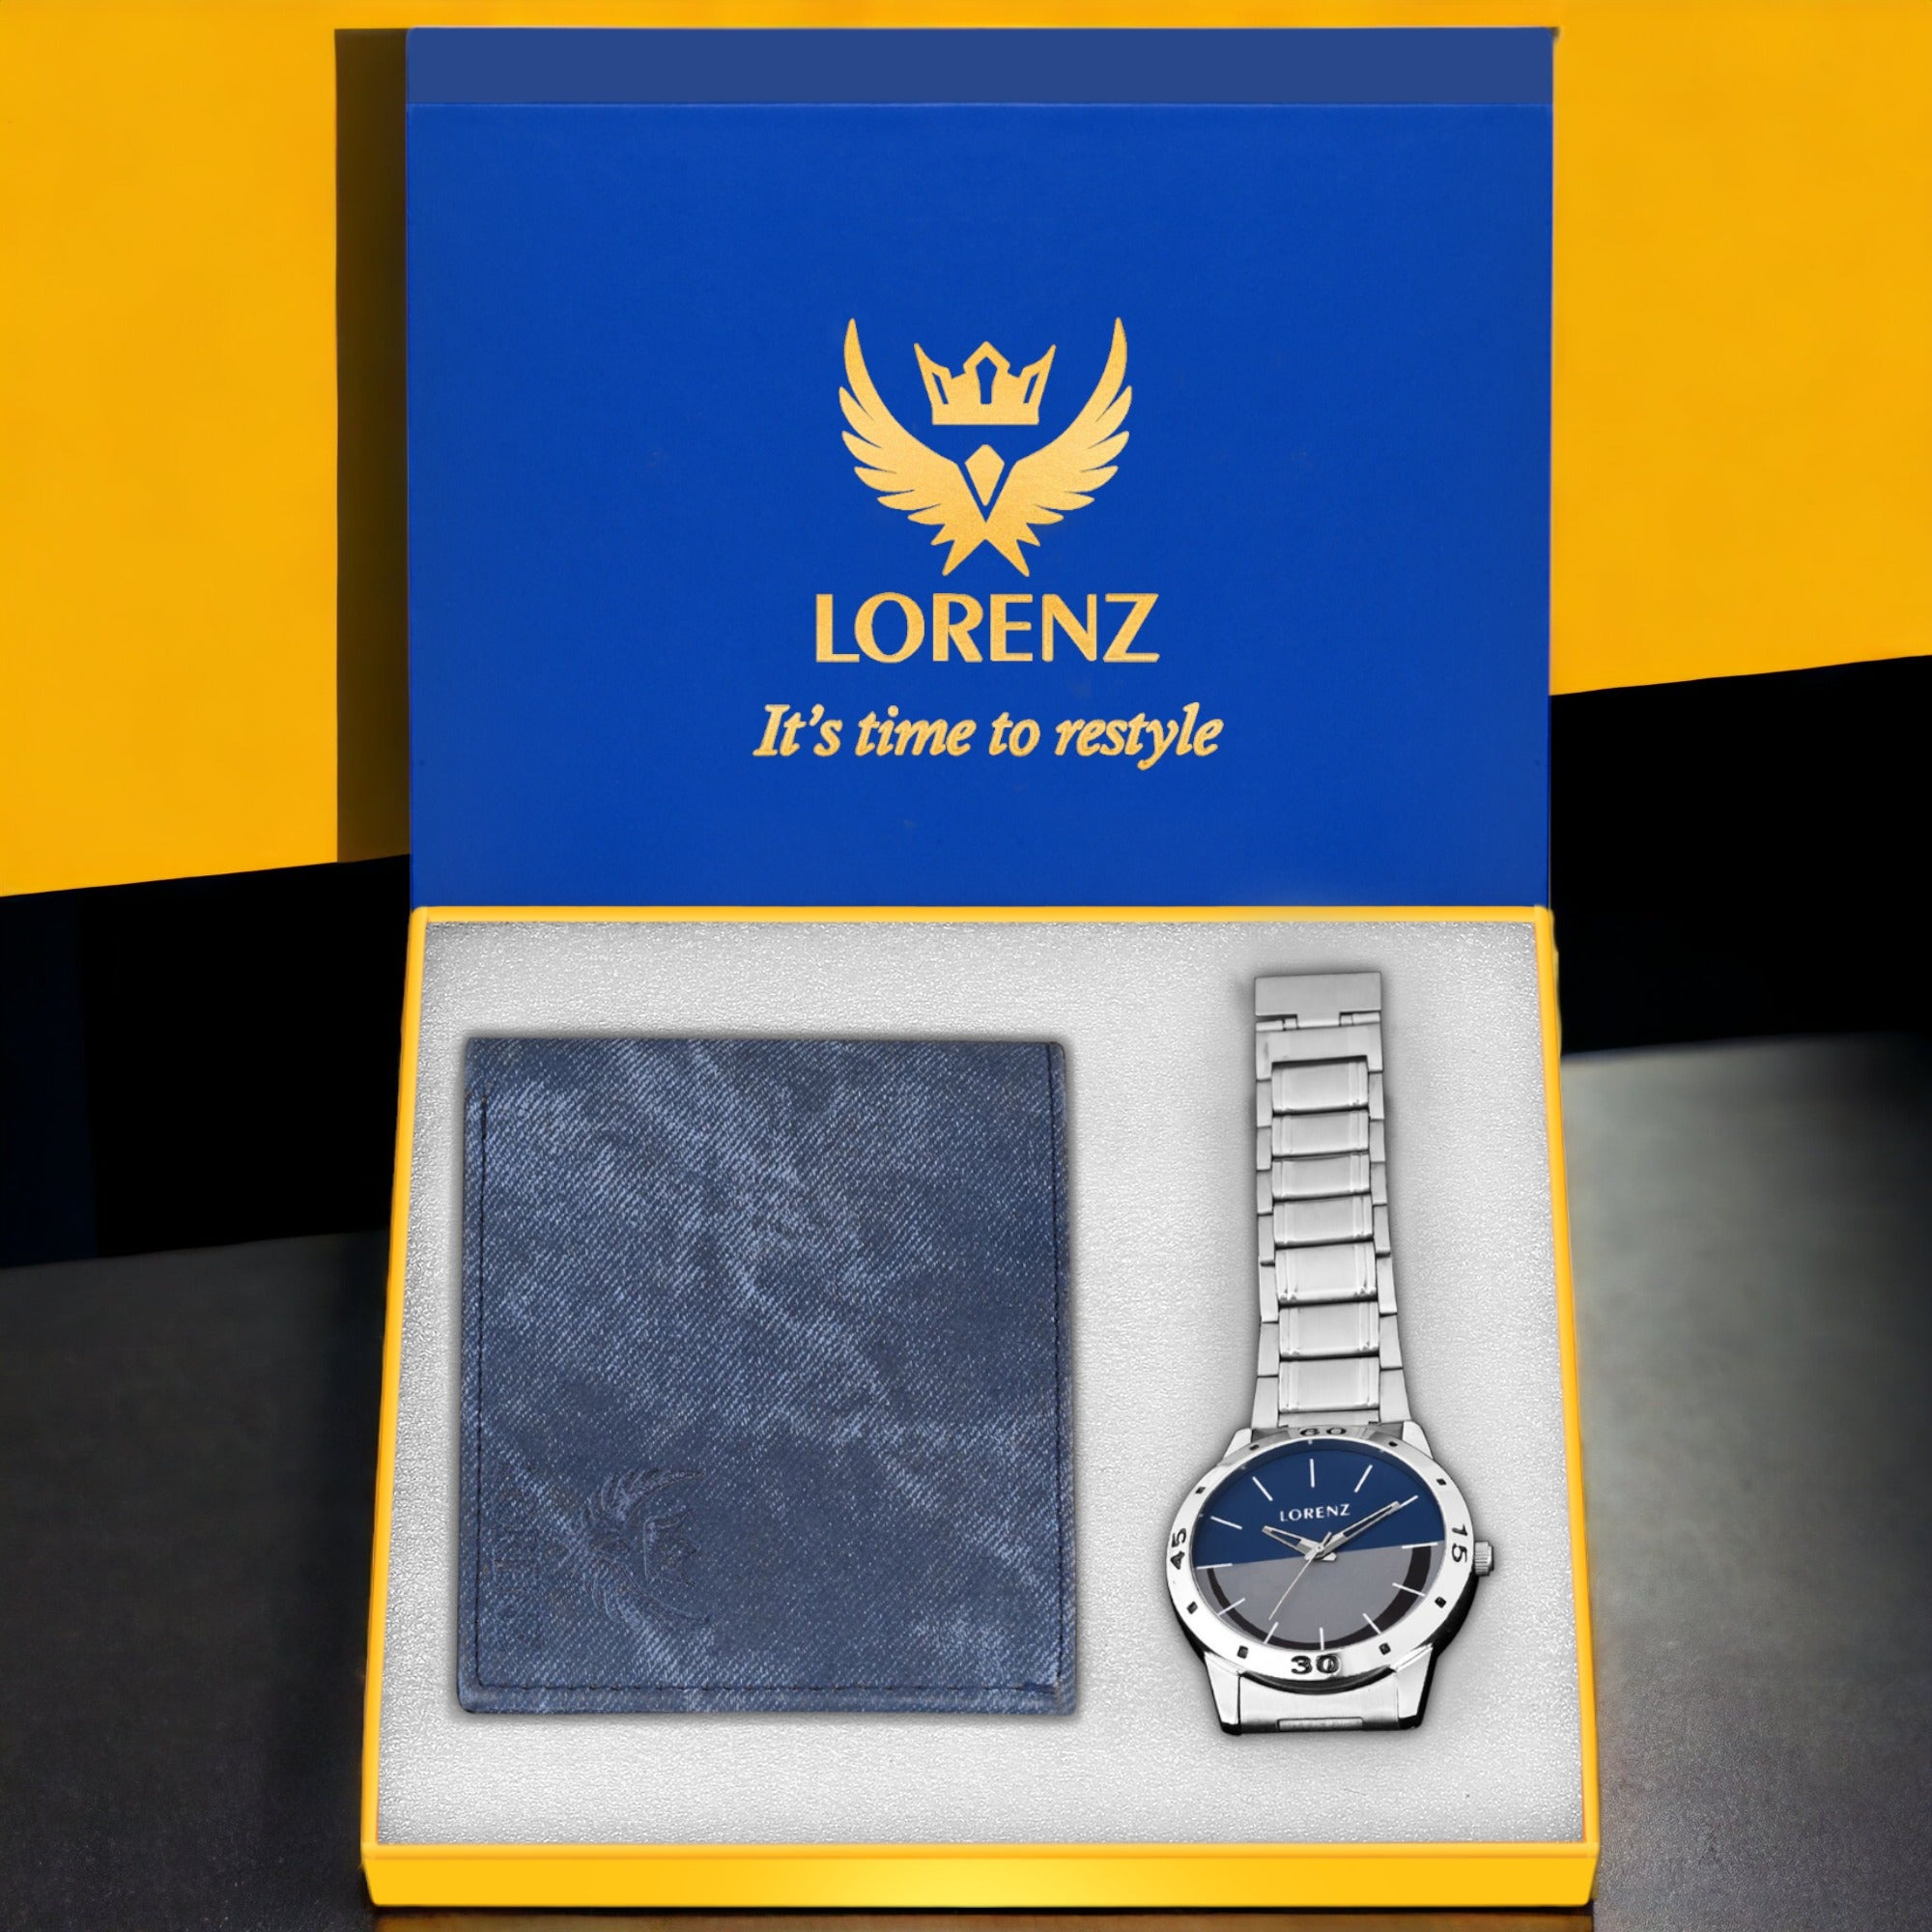 Lorenz Men's Blue Dial Watch with Silver Case and Blue Denim Wallet